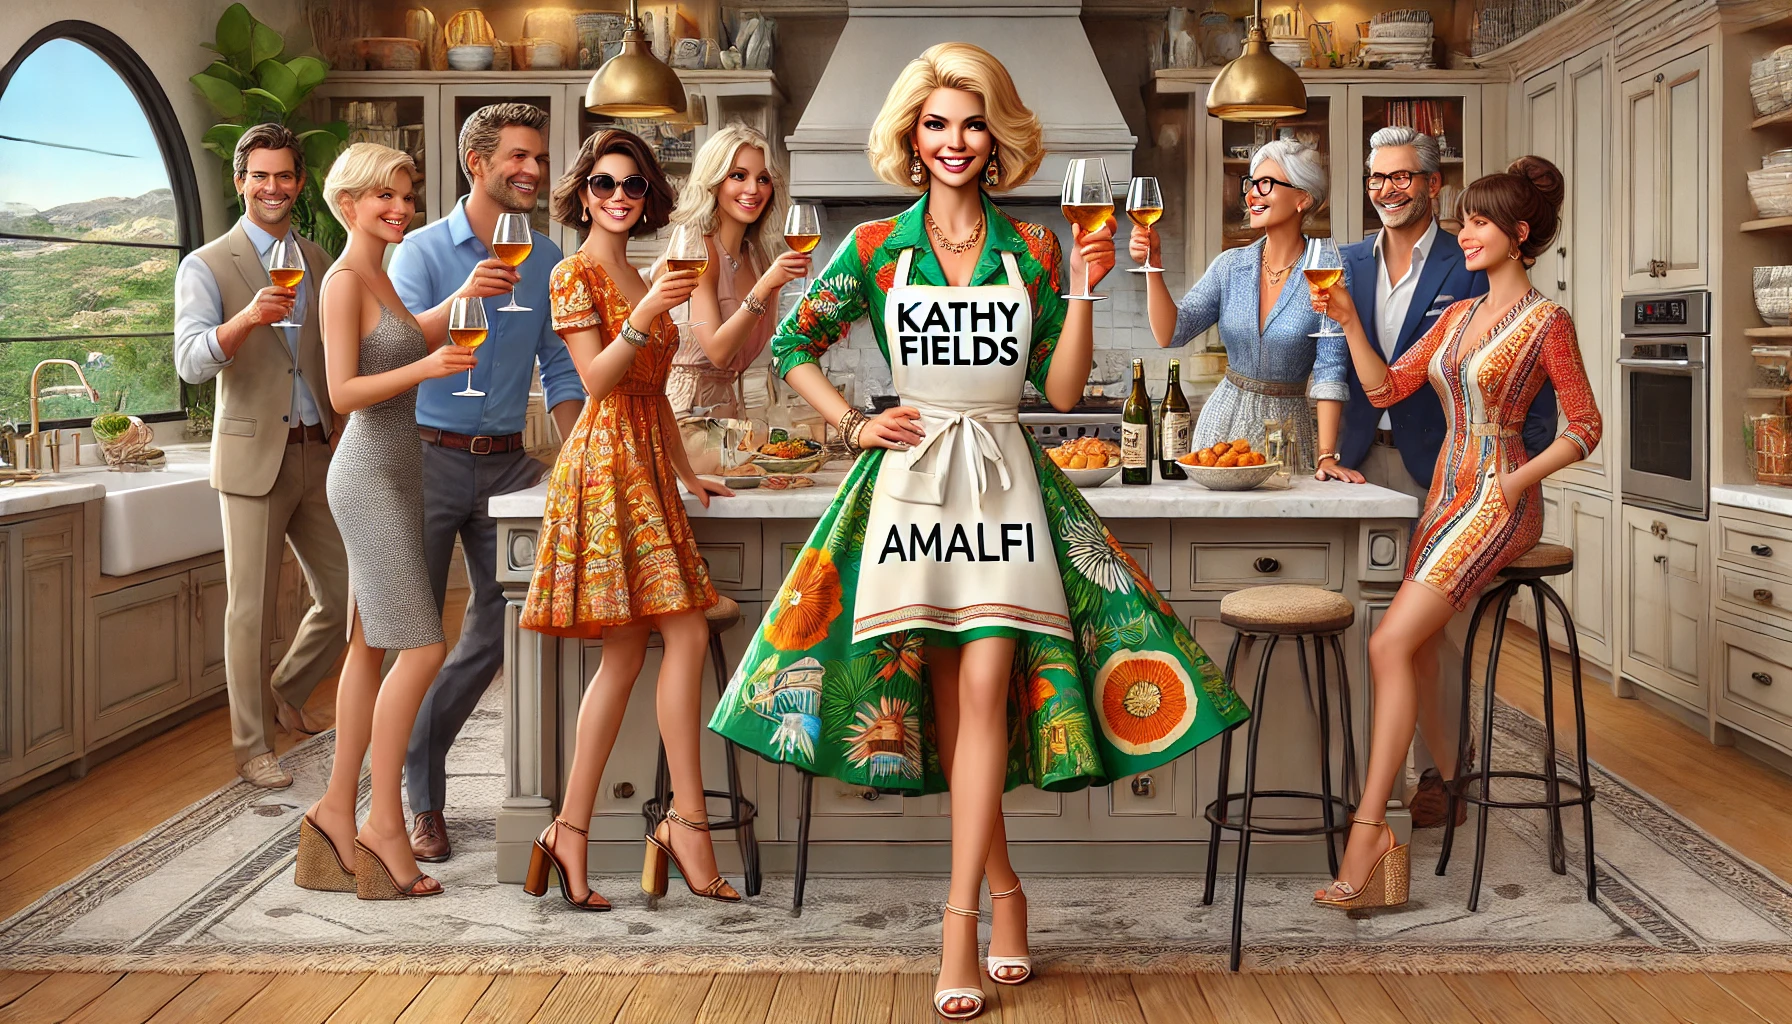 Kathy Fields wearing a stylish apron with the text "Kathy Fields Amalfi," along with her influencers in her custom California kitchen with Italian influences. 